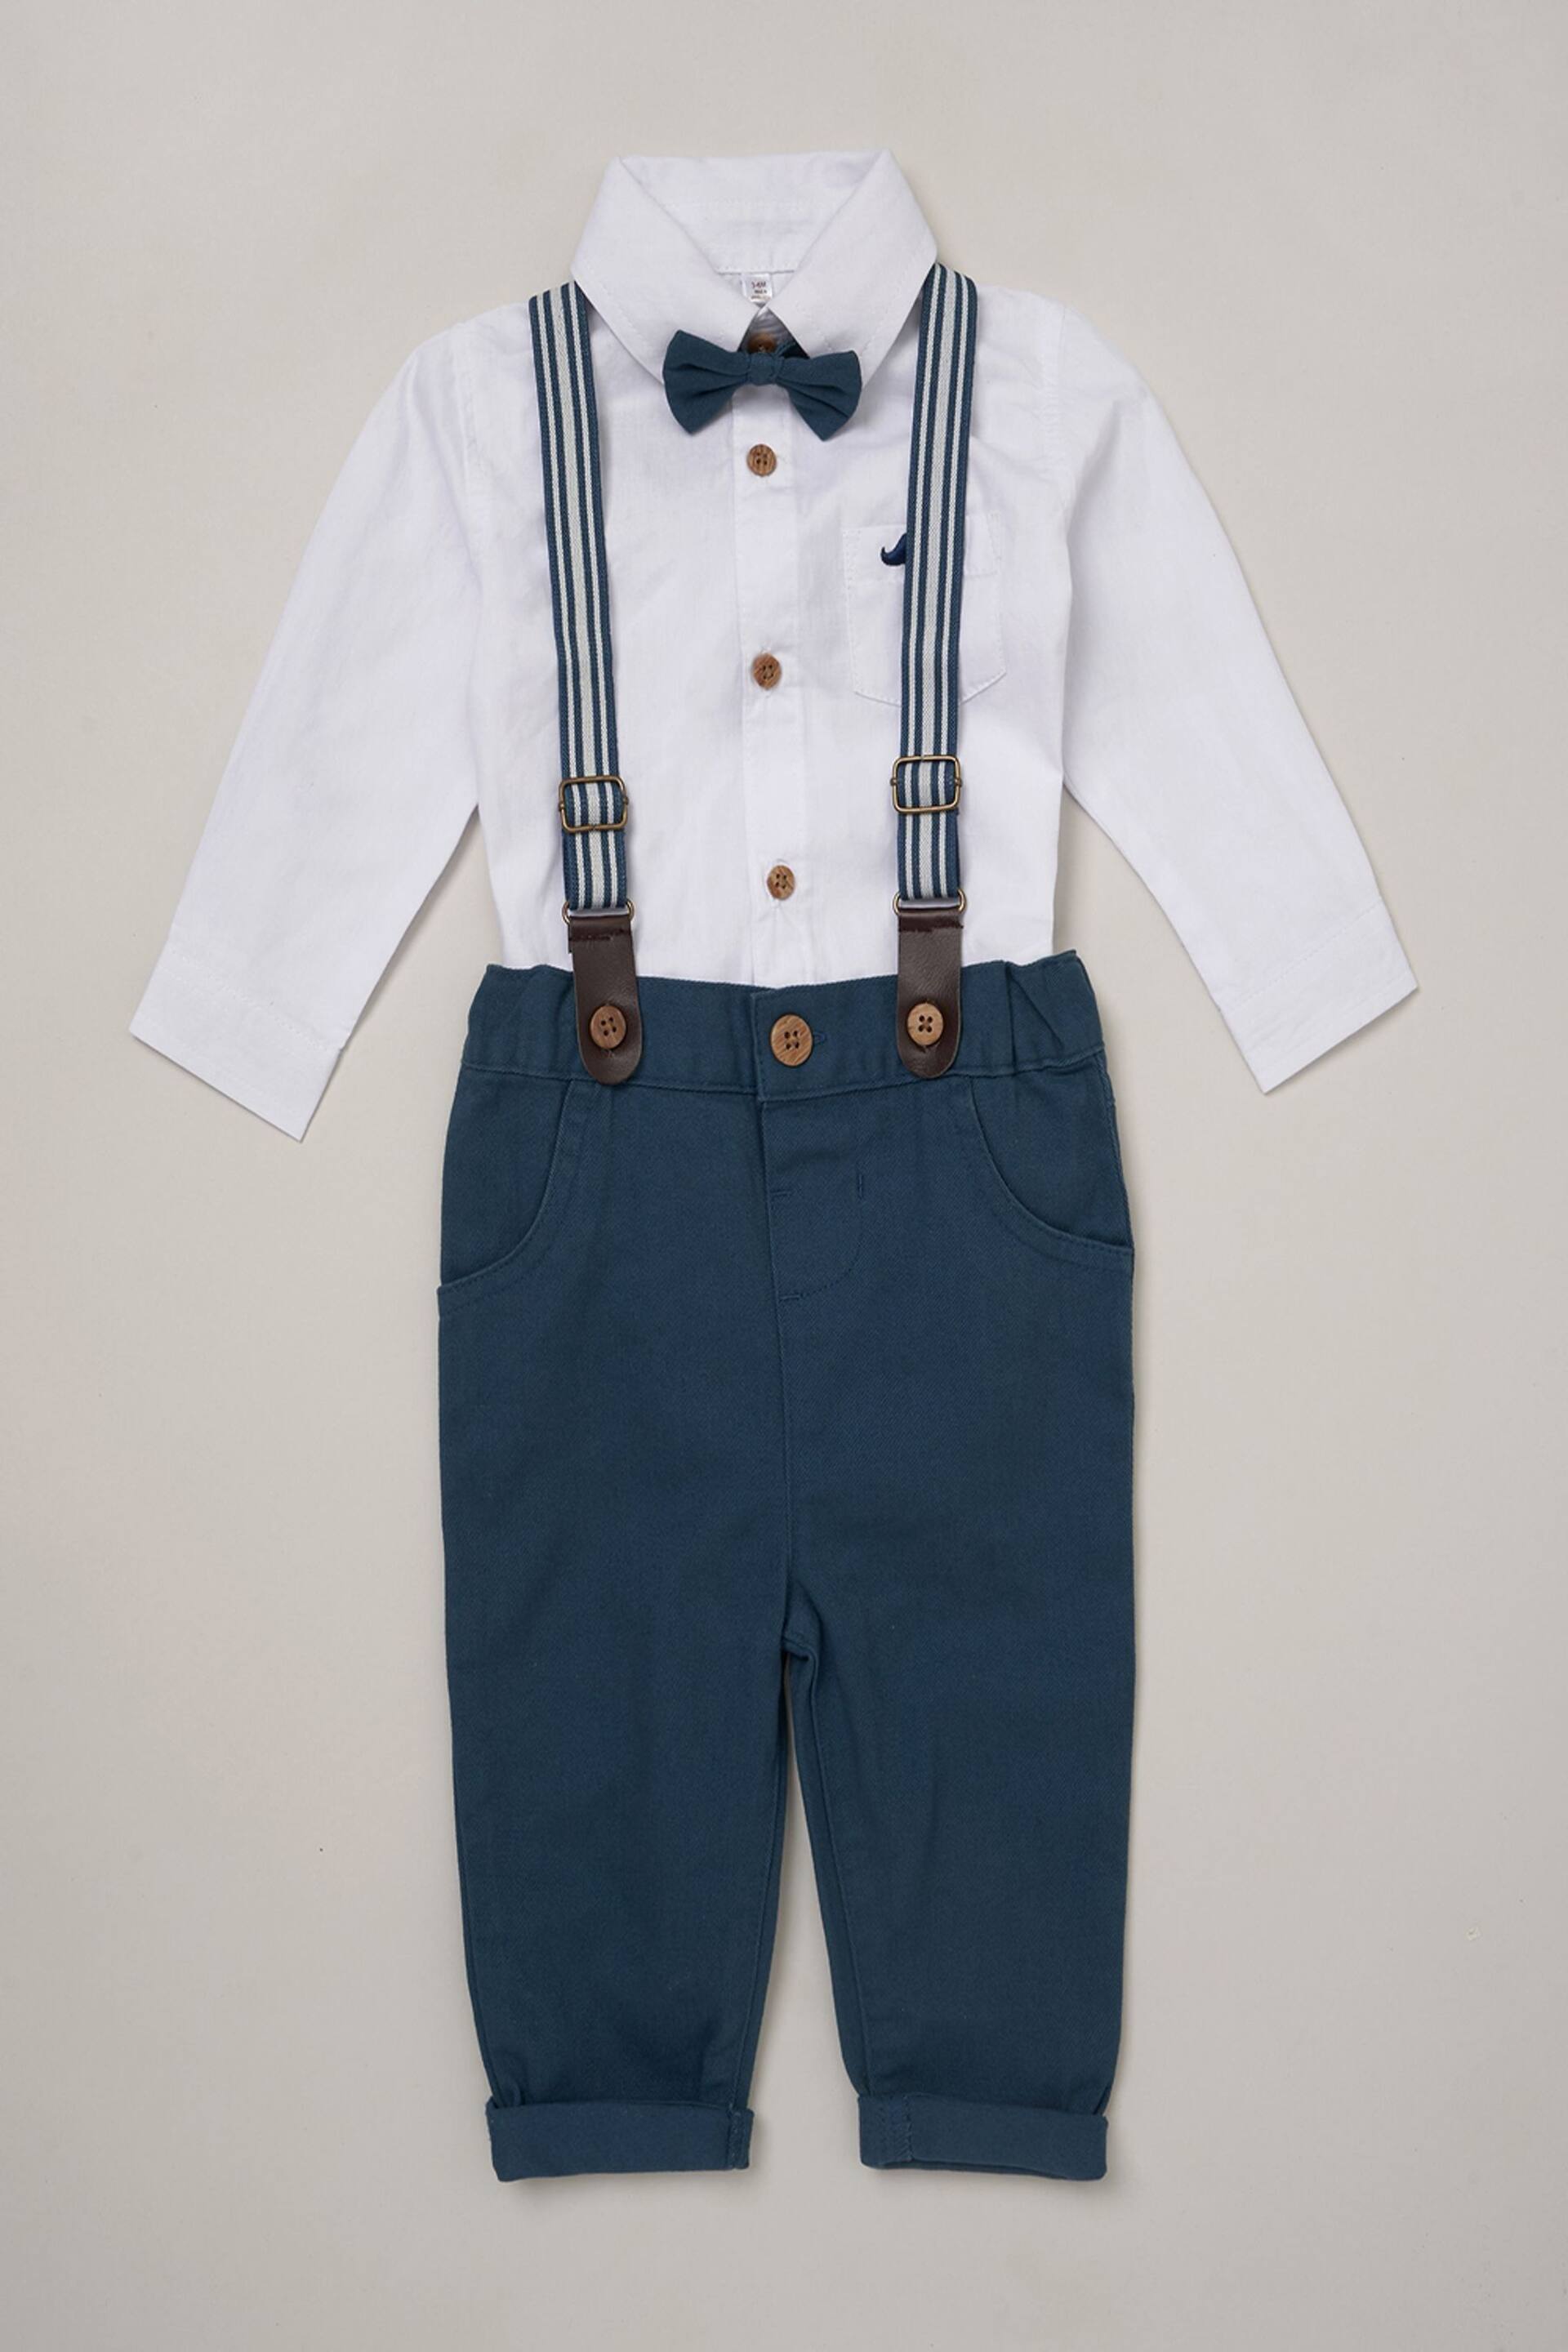 Little Gent Baby Mock Shirt Bodysuit and Braces Cotton Dungarees - Image 1 of 4